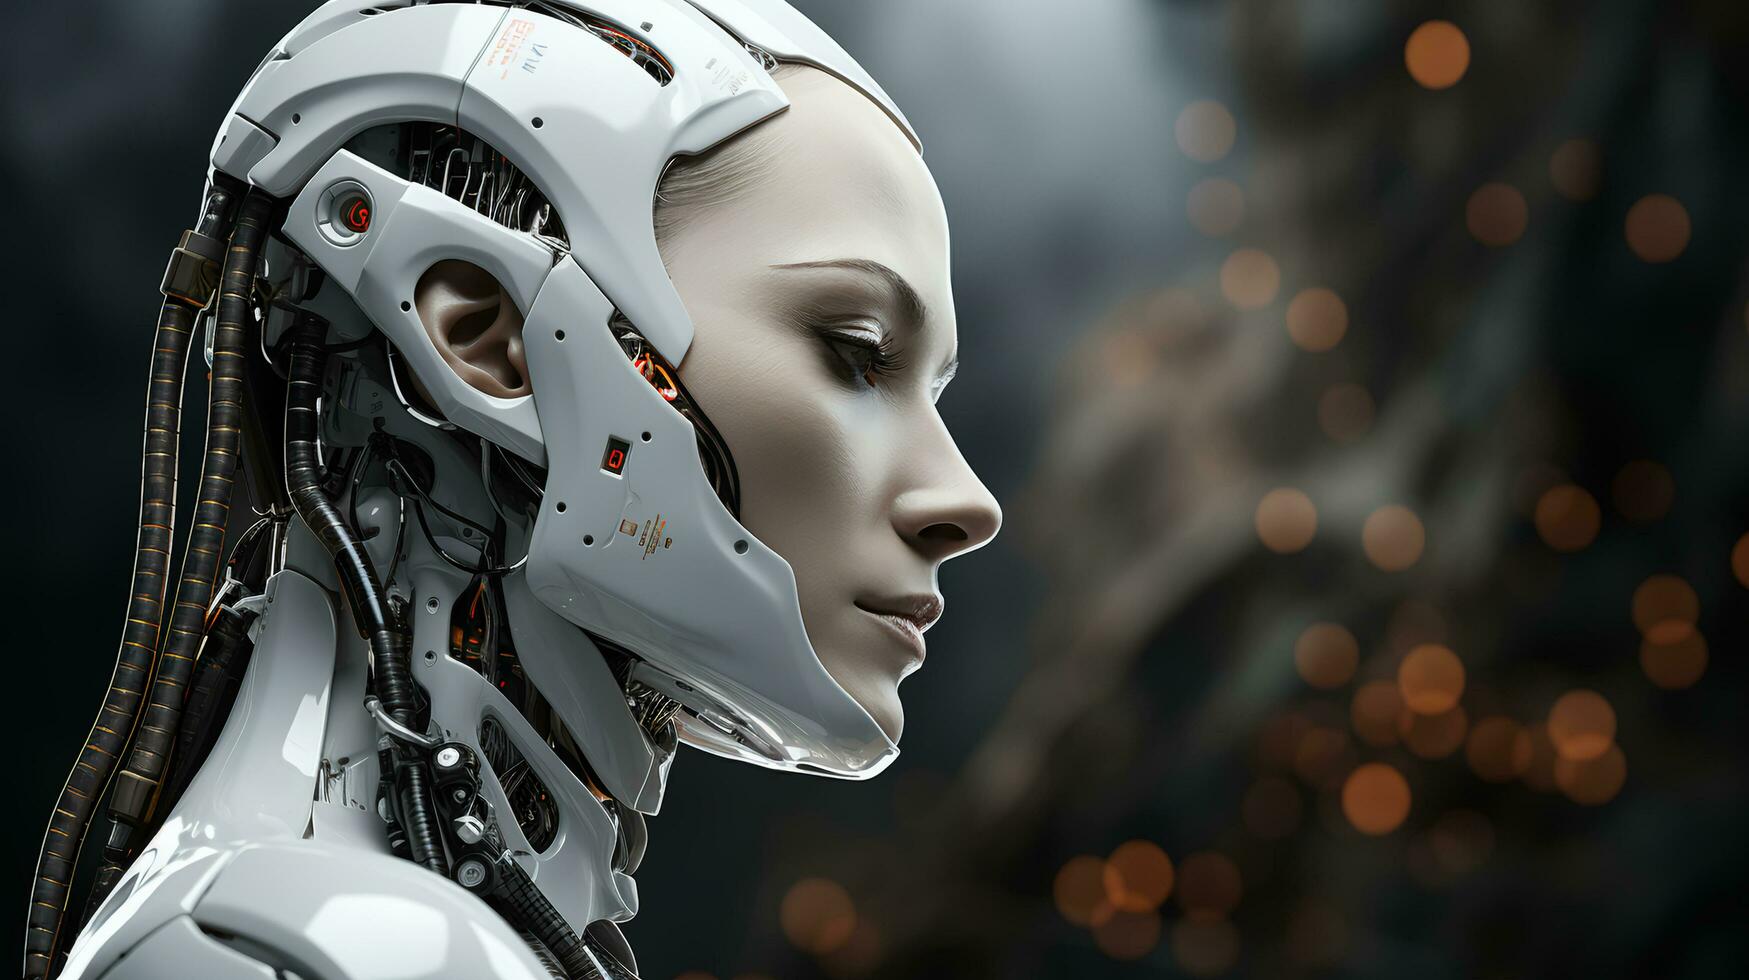 Beautiful face of a futuristic hi-tech cyborg robot woman. Connecting man and computer with artificial intelligence in the future of humanity photo